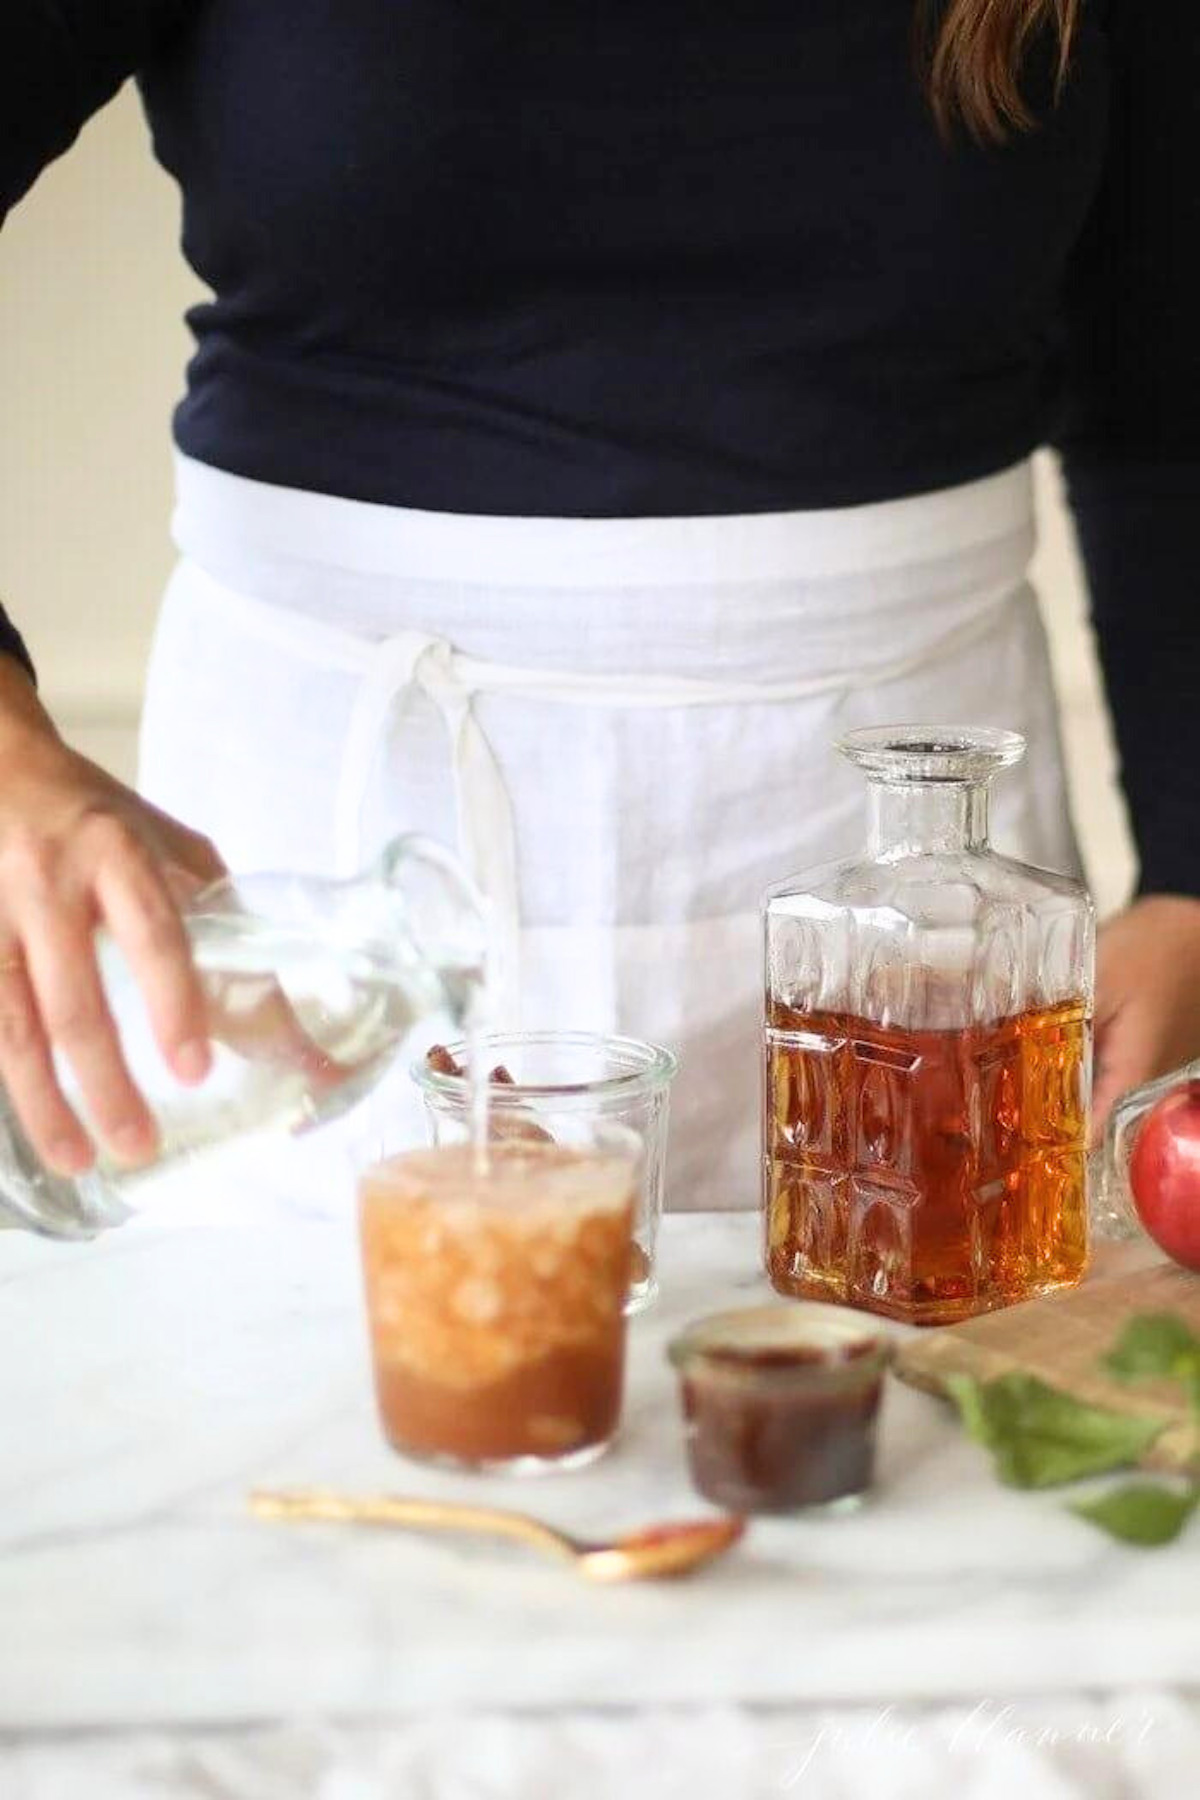 A woman wearing a black shirt, creating an apple butter old fashioned at a bar.